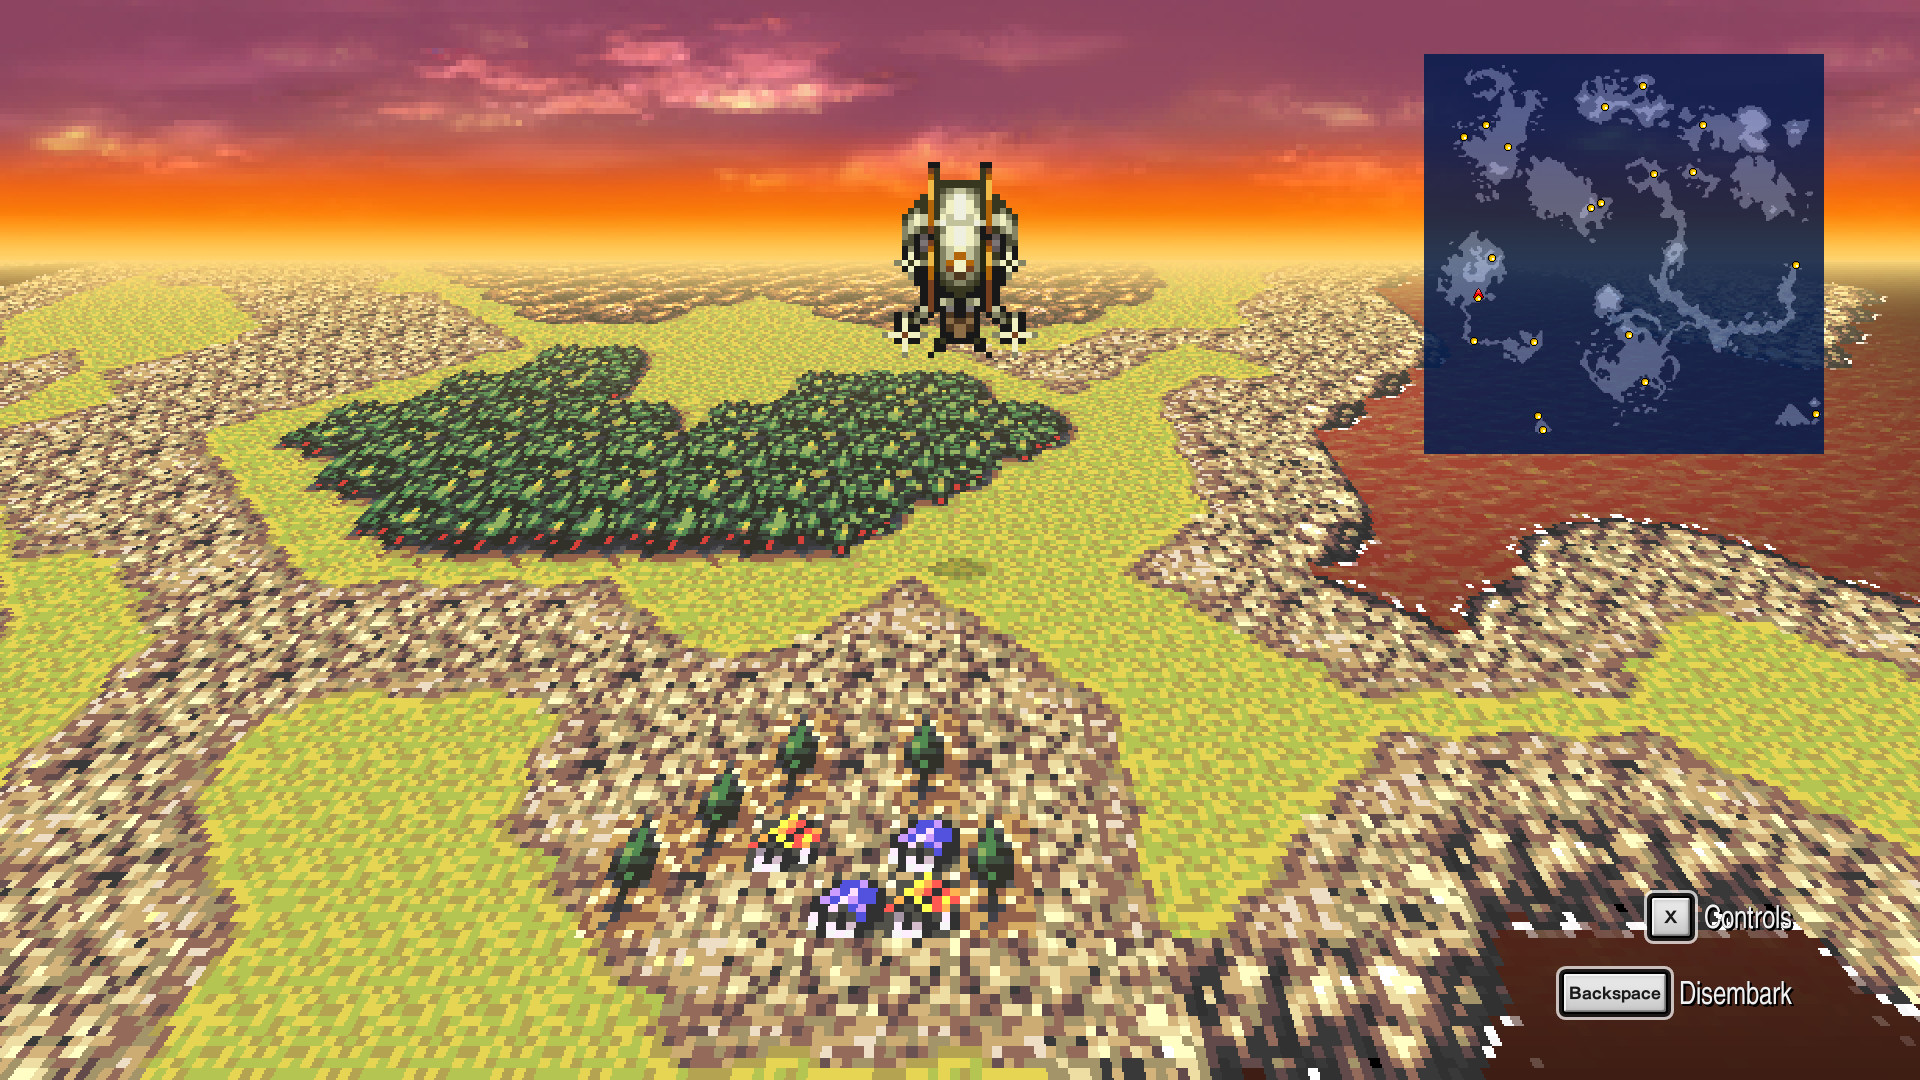 Final Fantasy 6 Overview